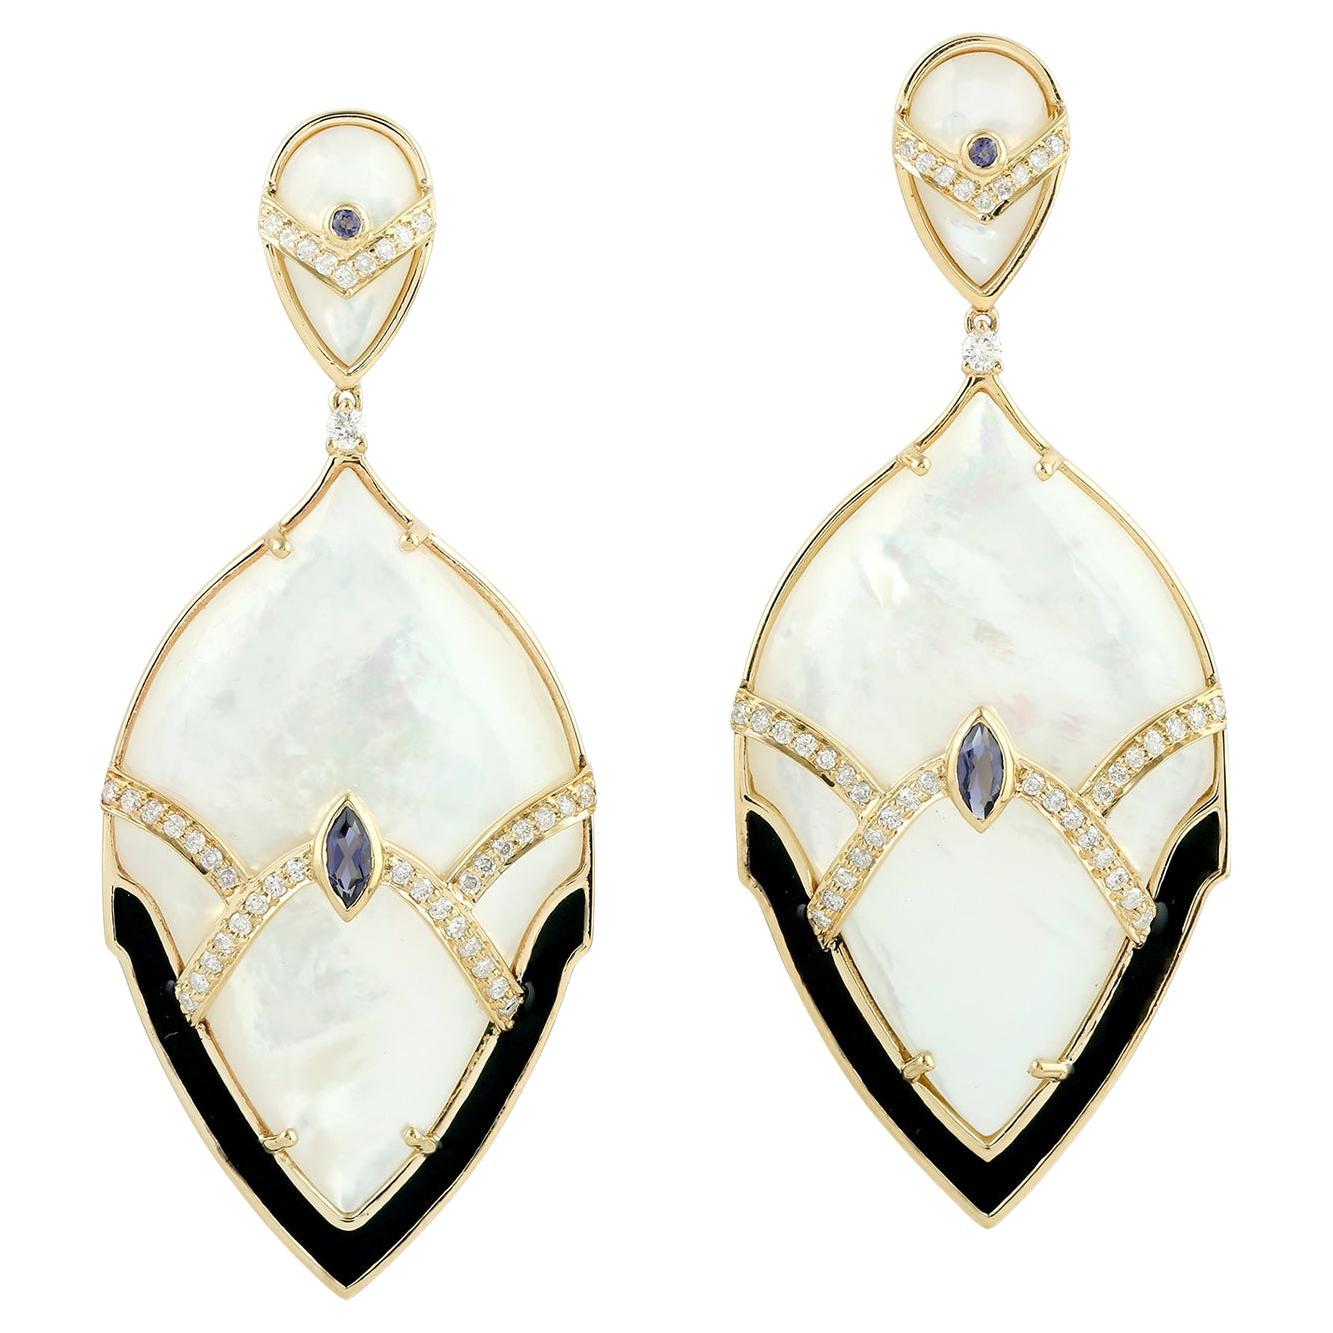 48.77ct Pearl dangle Earrings With Iolite & Diamonds Made In 18k yellow Gold